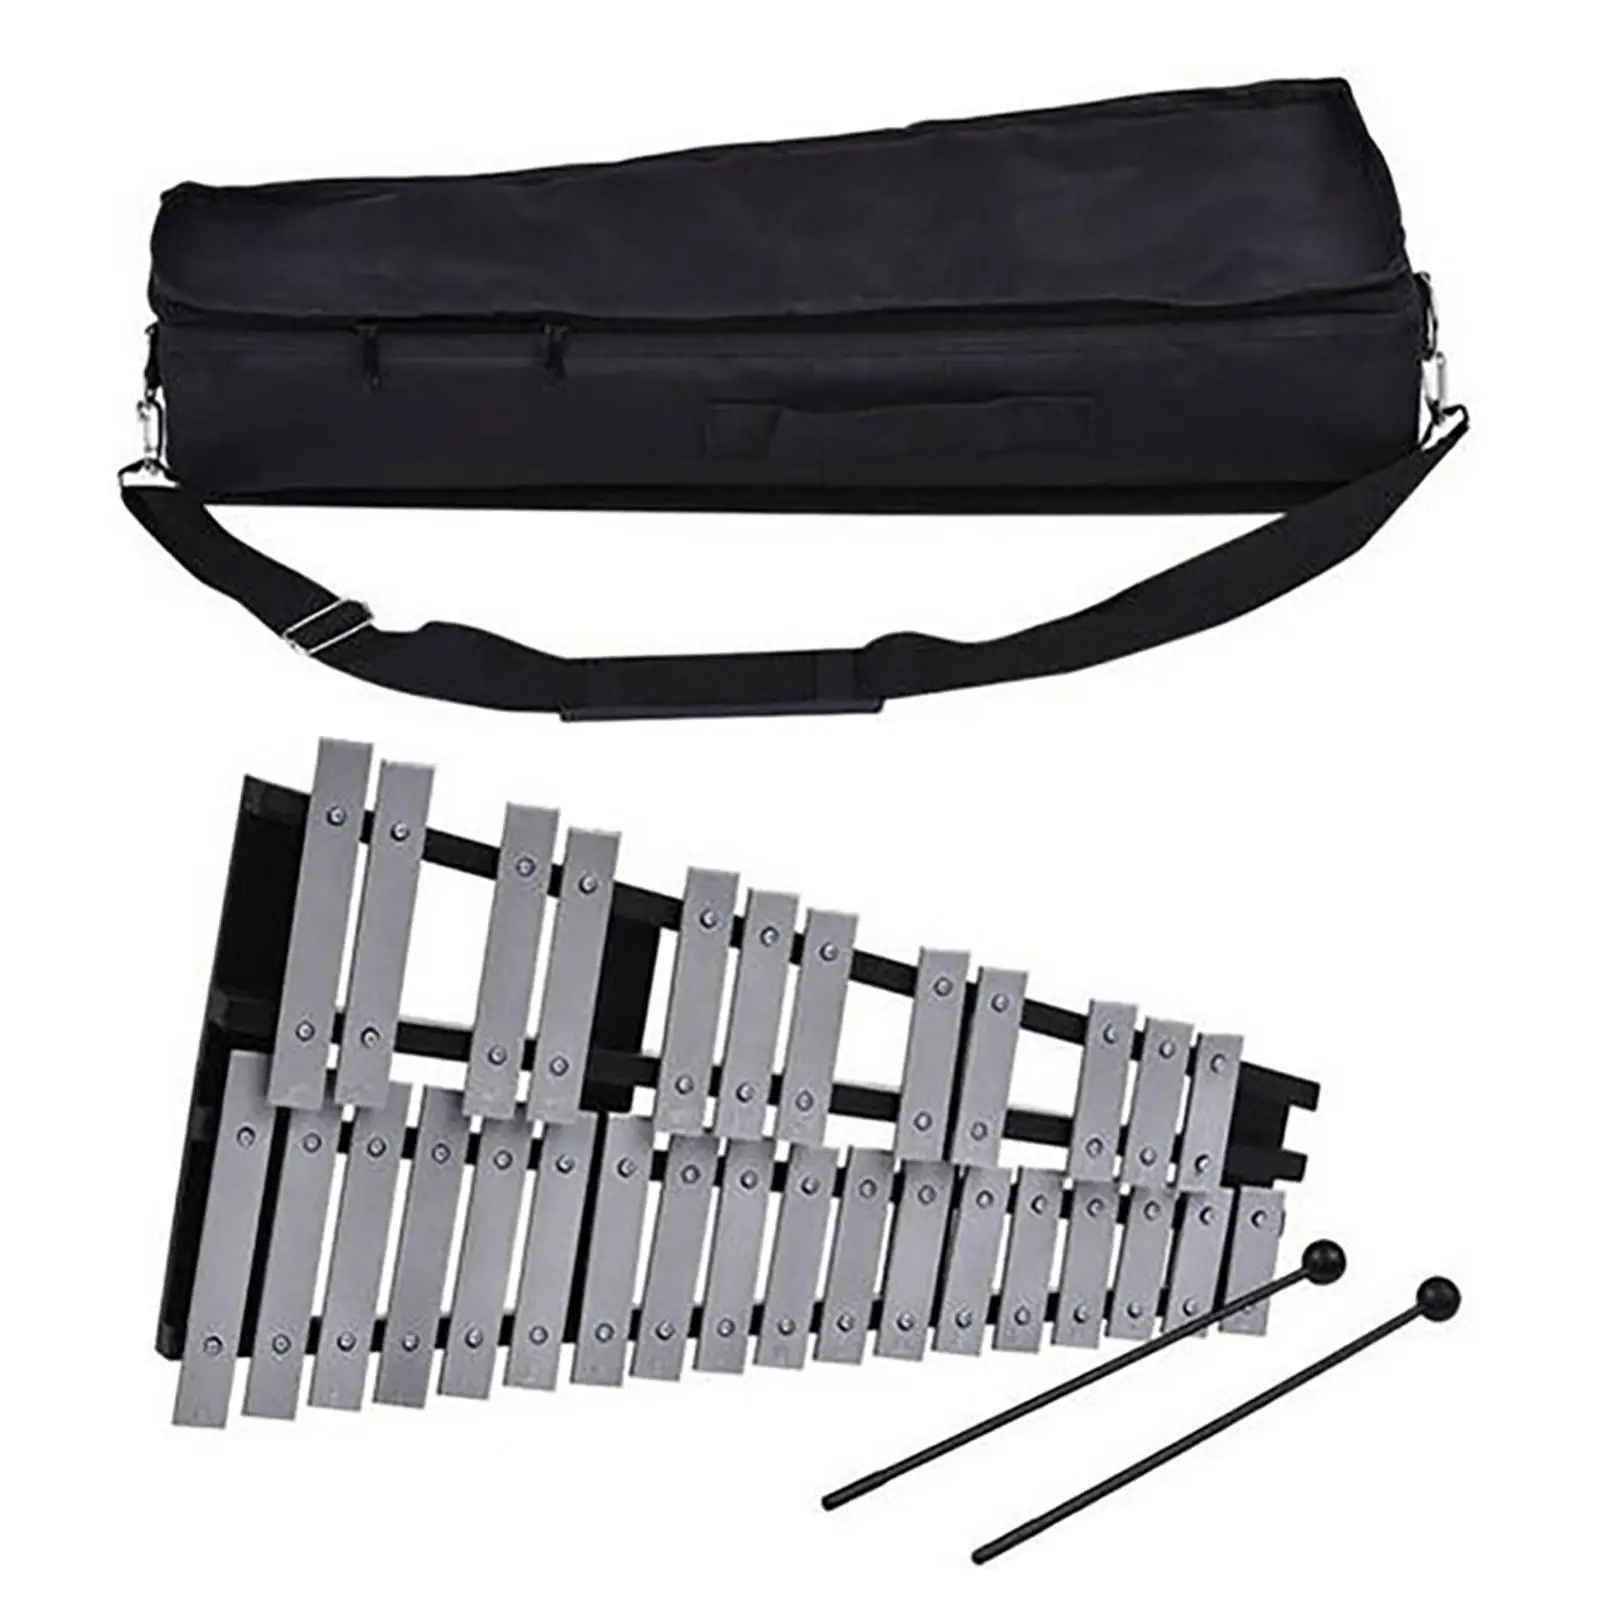 Metal 32 Note Glockenspiel Xylophone Bell Includes 2 Mallets for Birthday Gift